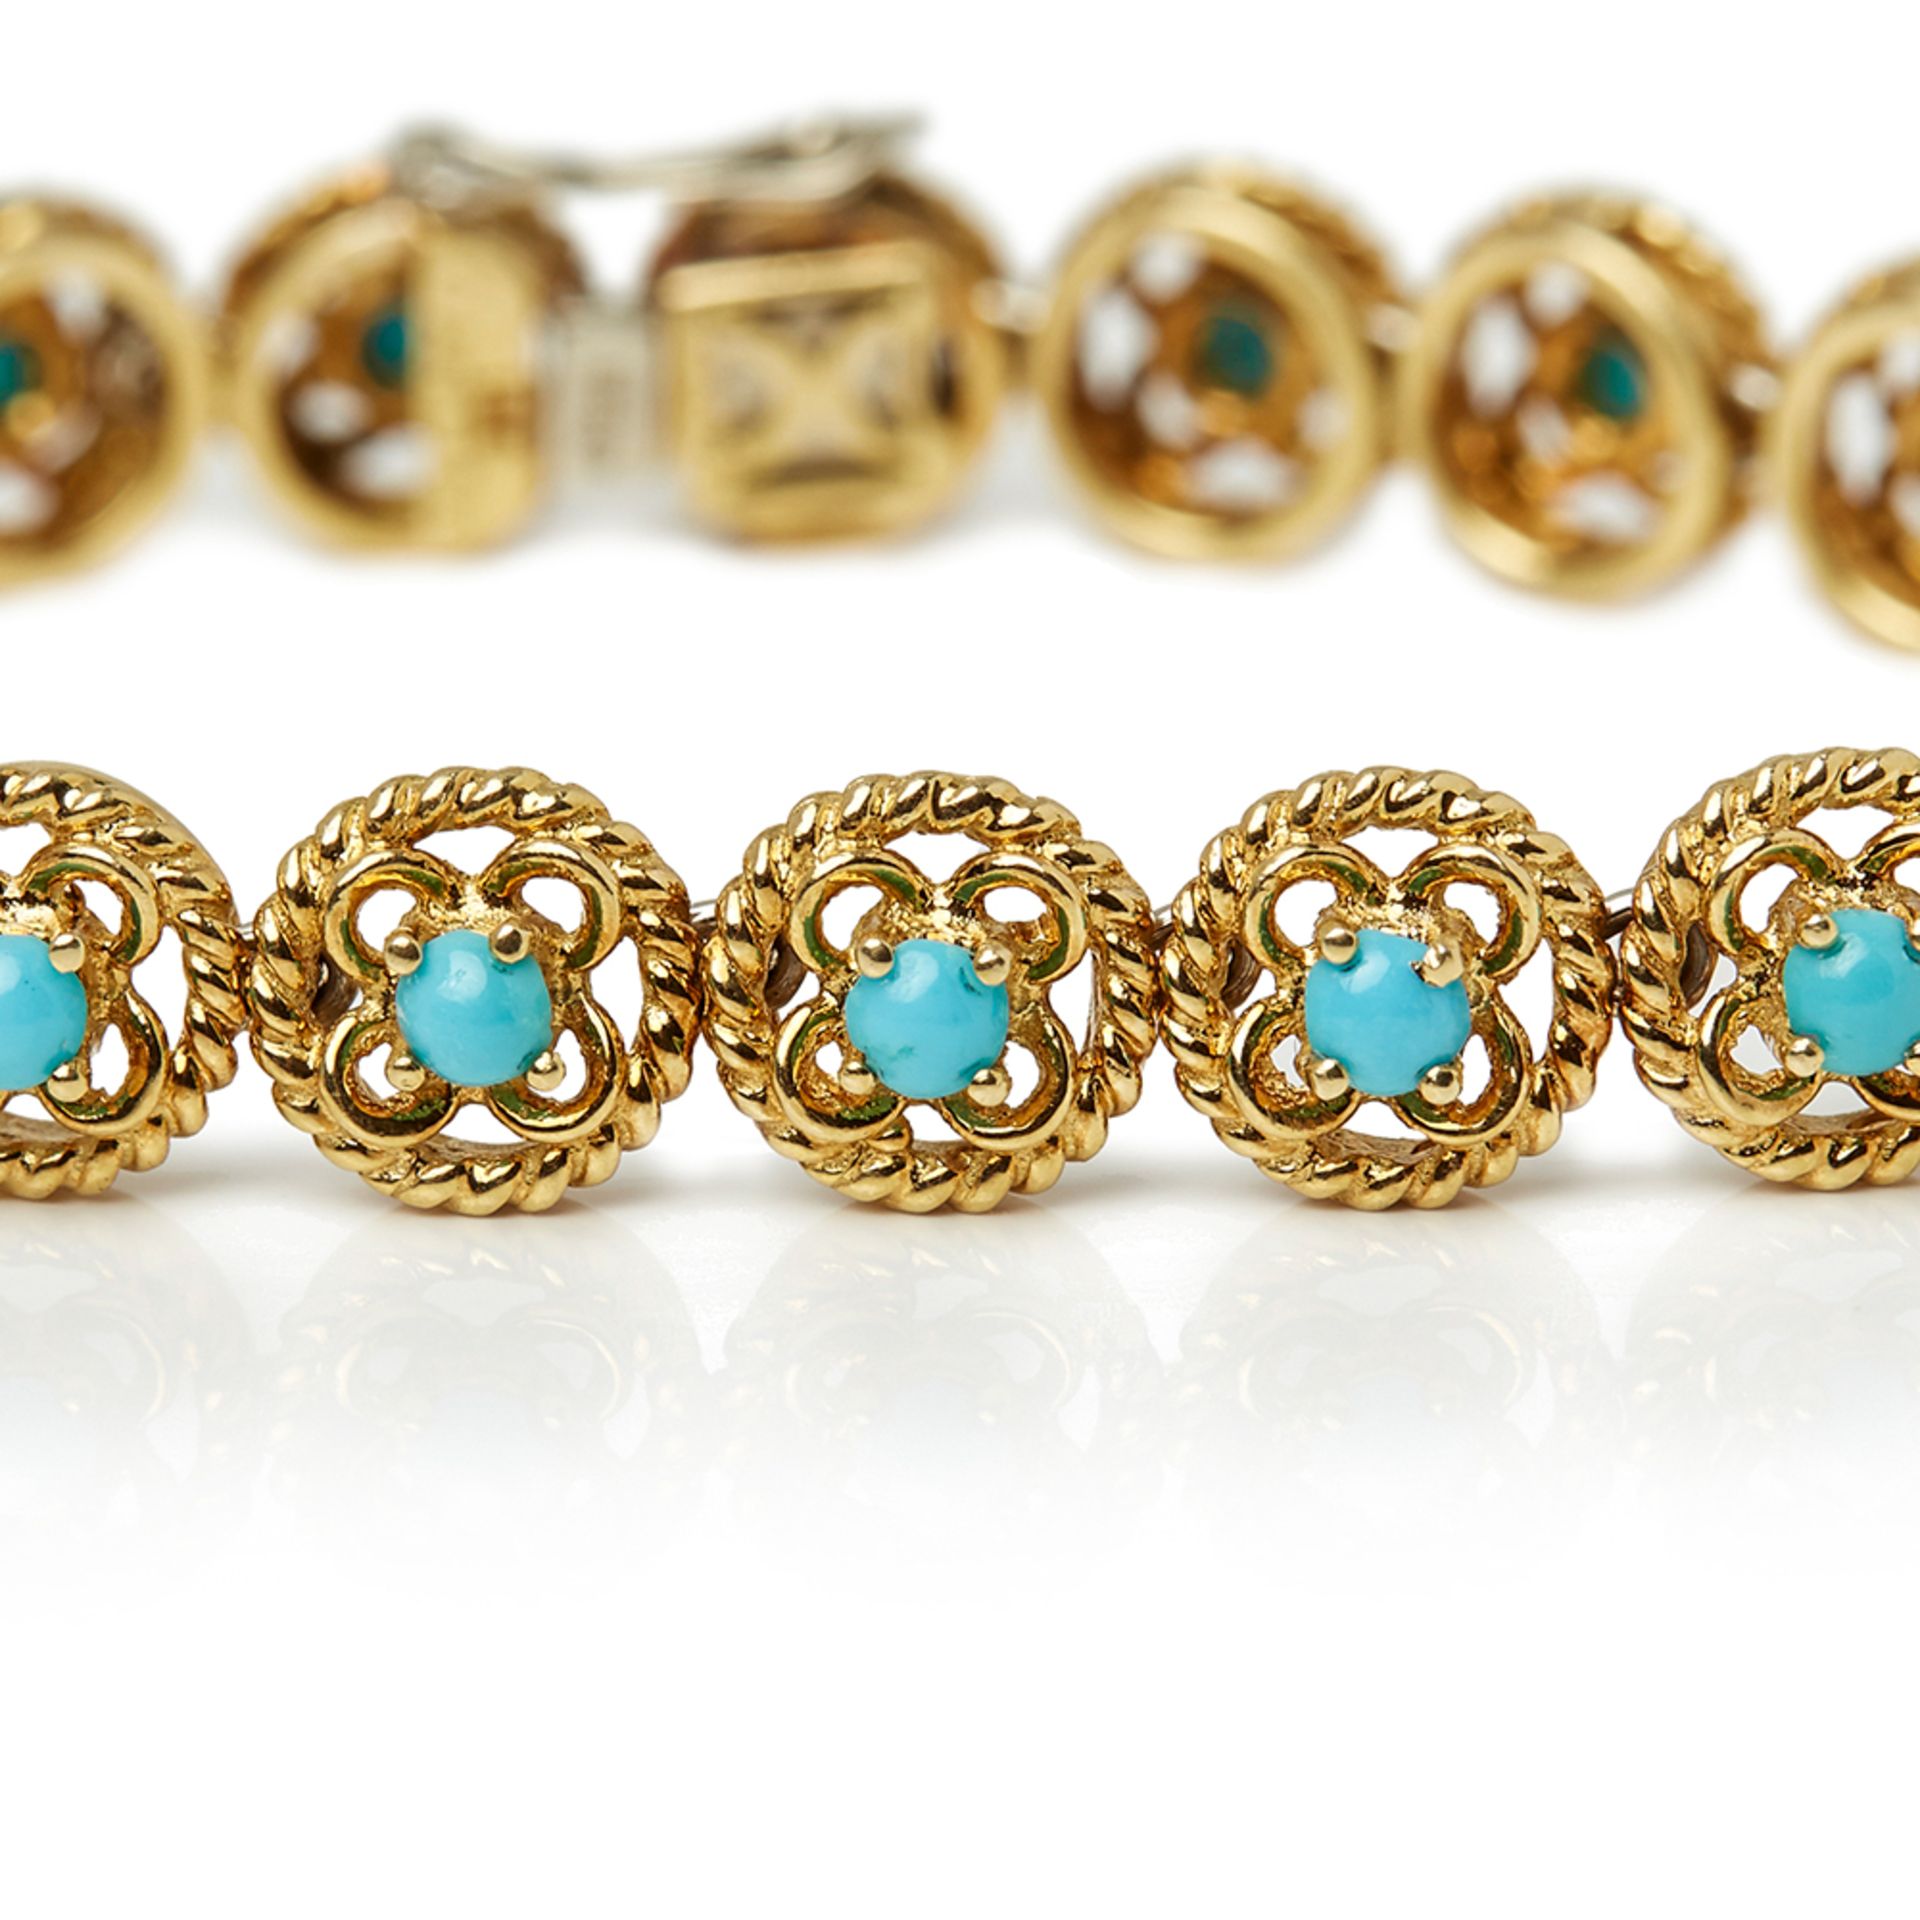 Cartier 18k Yellow Gold Turquoise Bracelet - Image 3 of 12